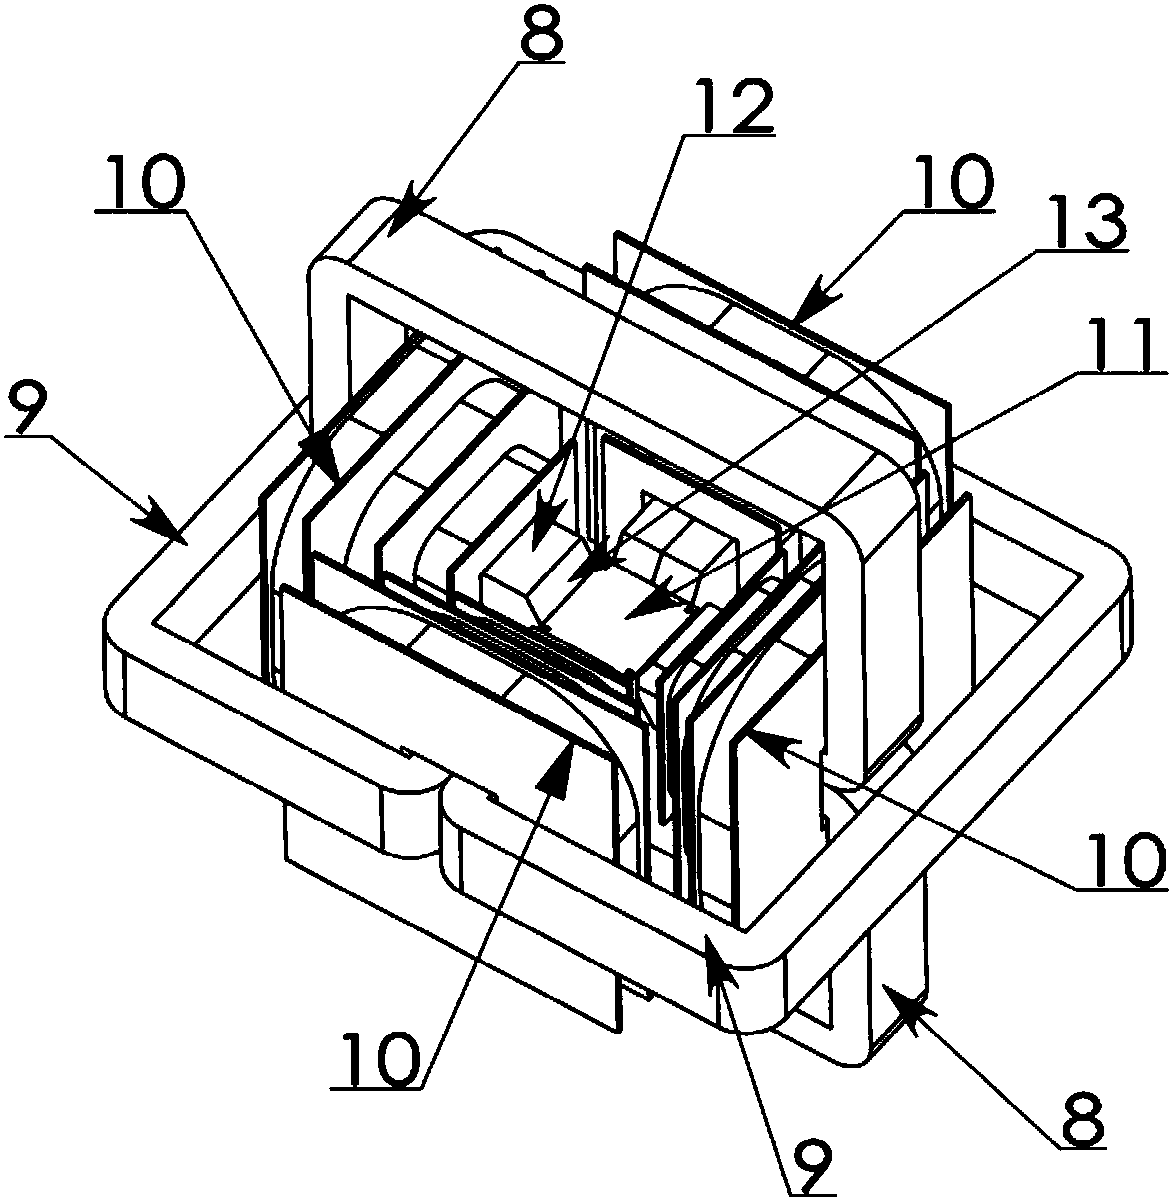 Test system and measurement method for rotary magnetic property of nano-crystalline